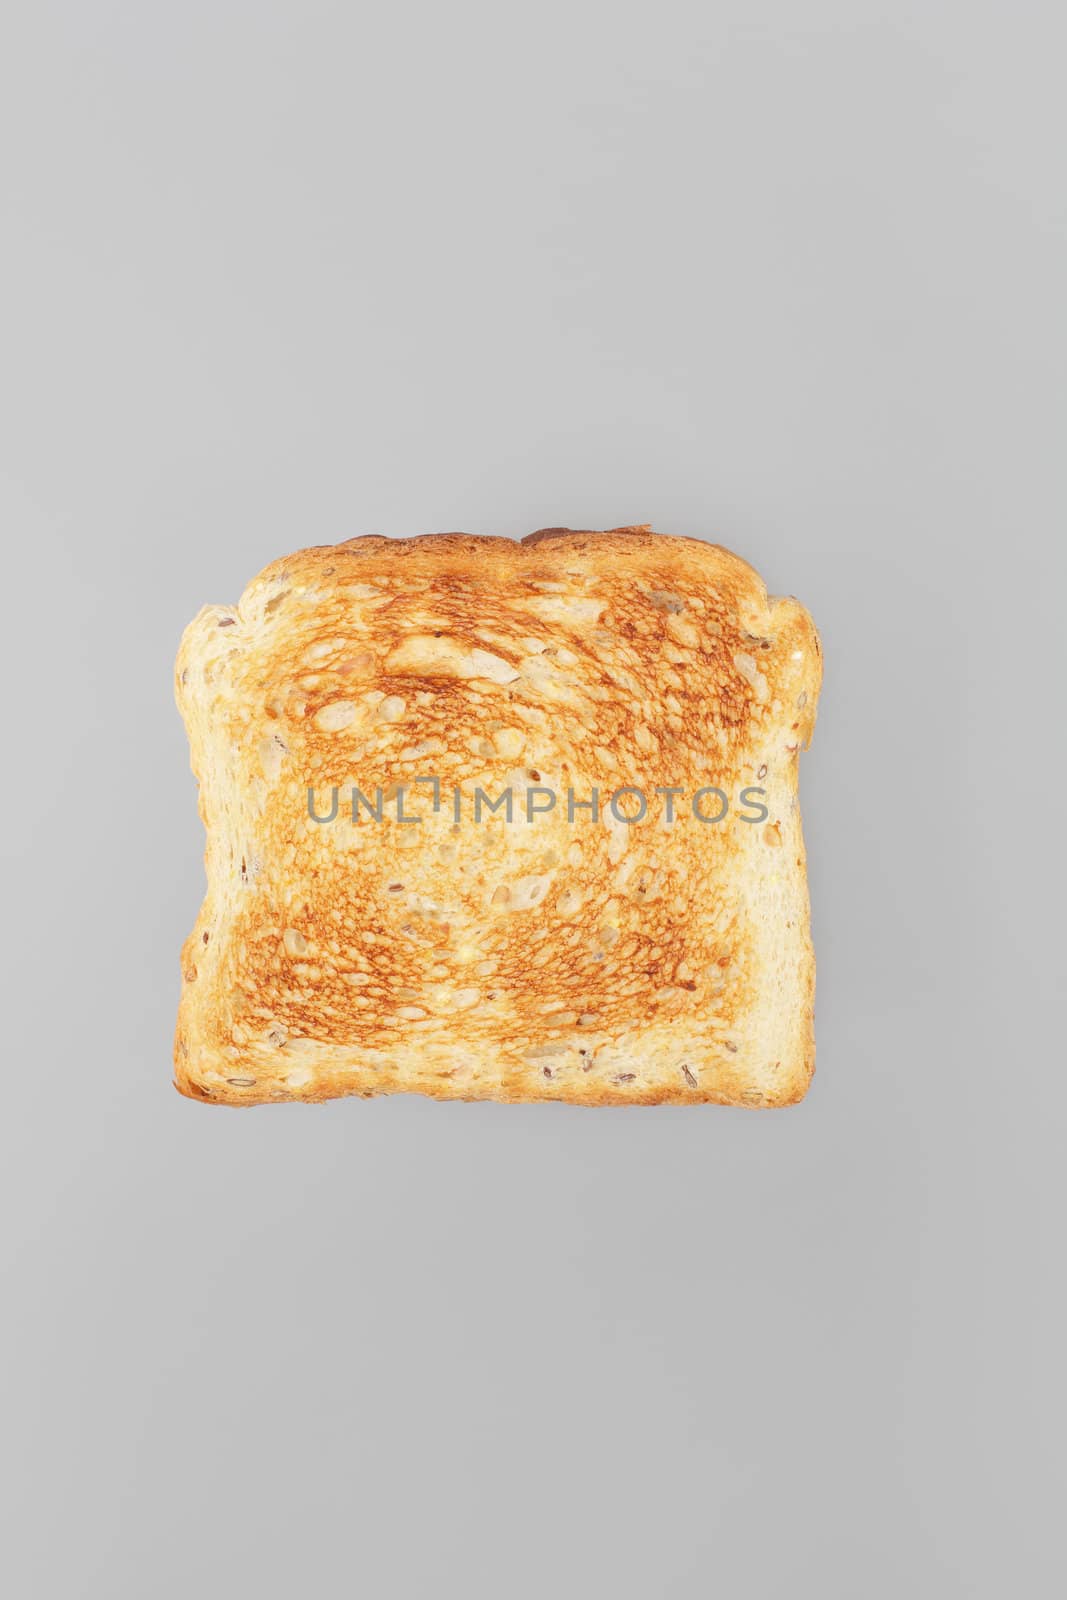 A Slice of toast bread on grey background